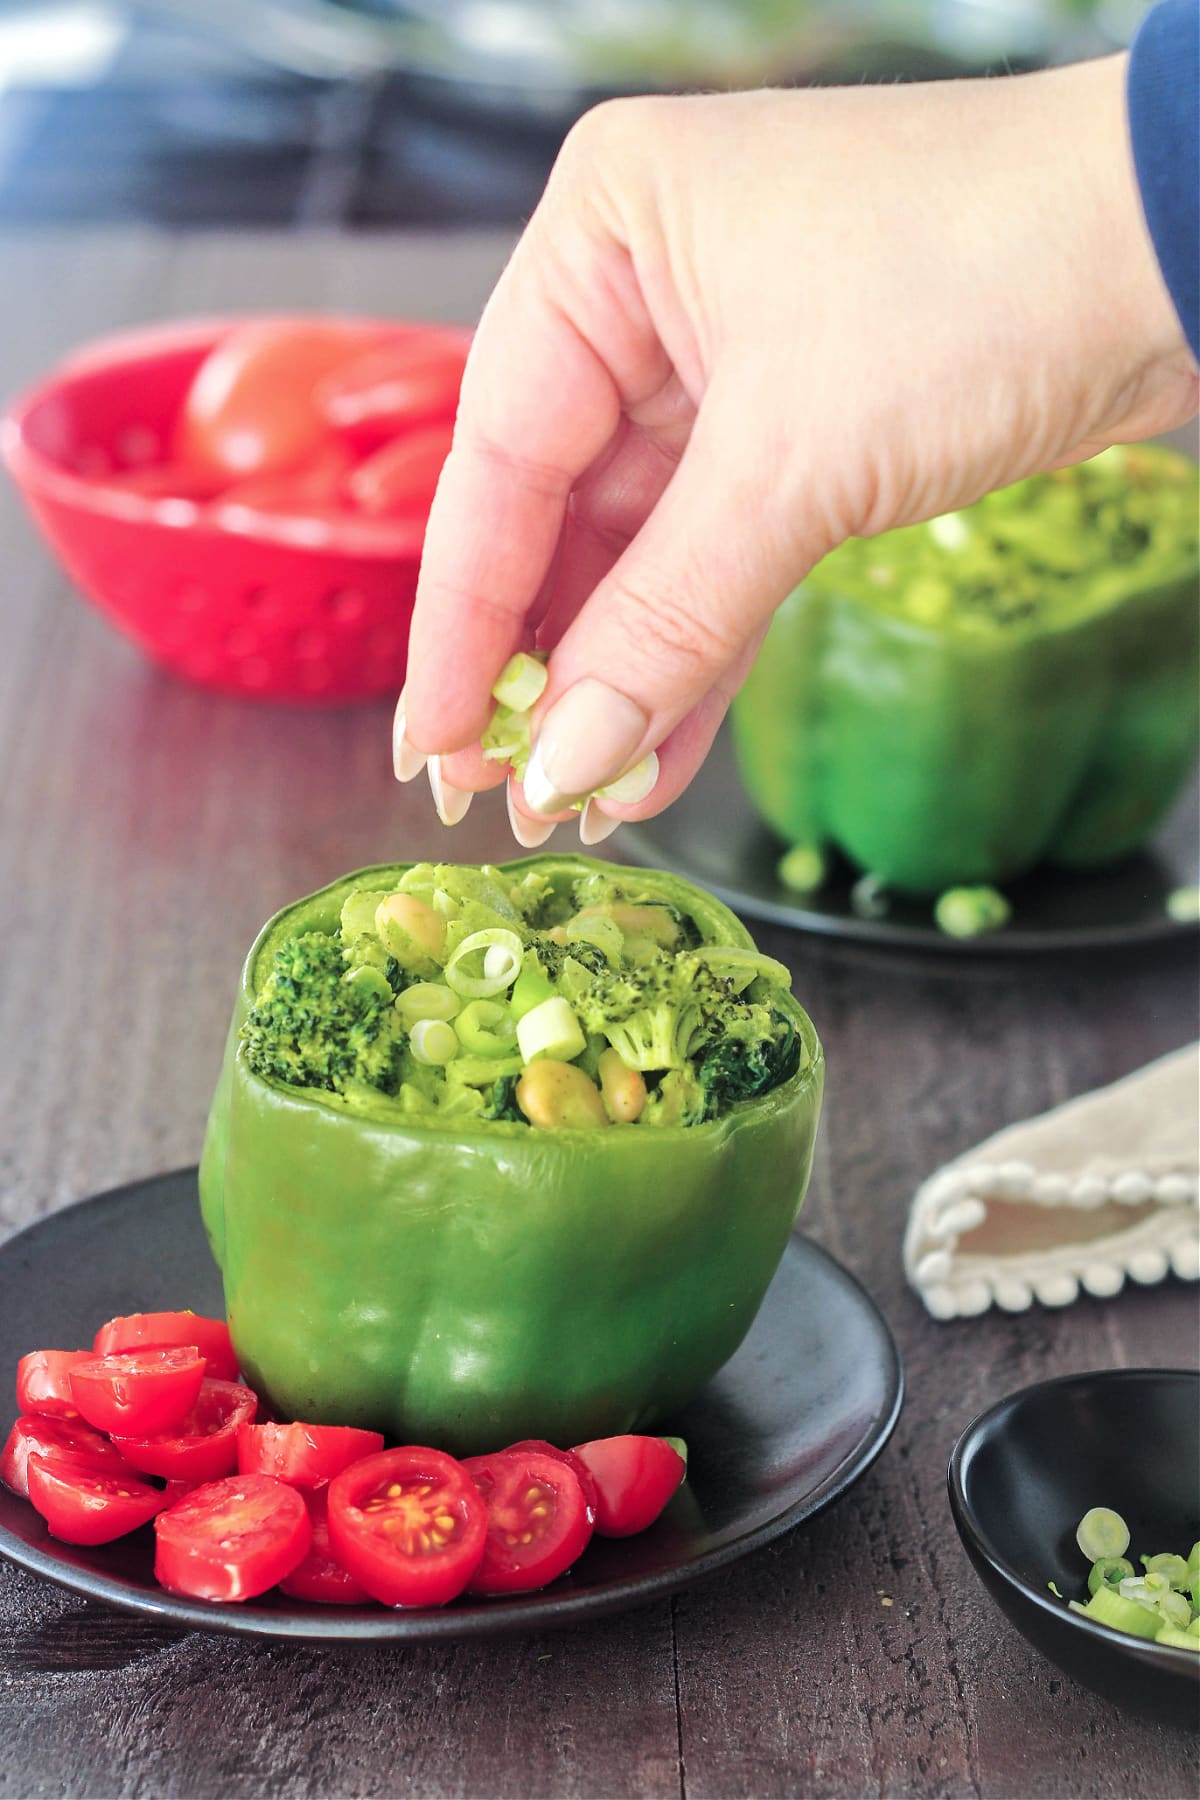 A hand sprinkling sliced green onions over a green bell pepper standing on a matte black plate. The pepper is stuffed with a green goddess mixture of beans, broccoli, onion, riced palm hearts. Sliced red cherry tomatoes sit on side of pepper as a salad / garnish.